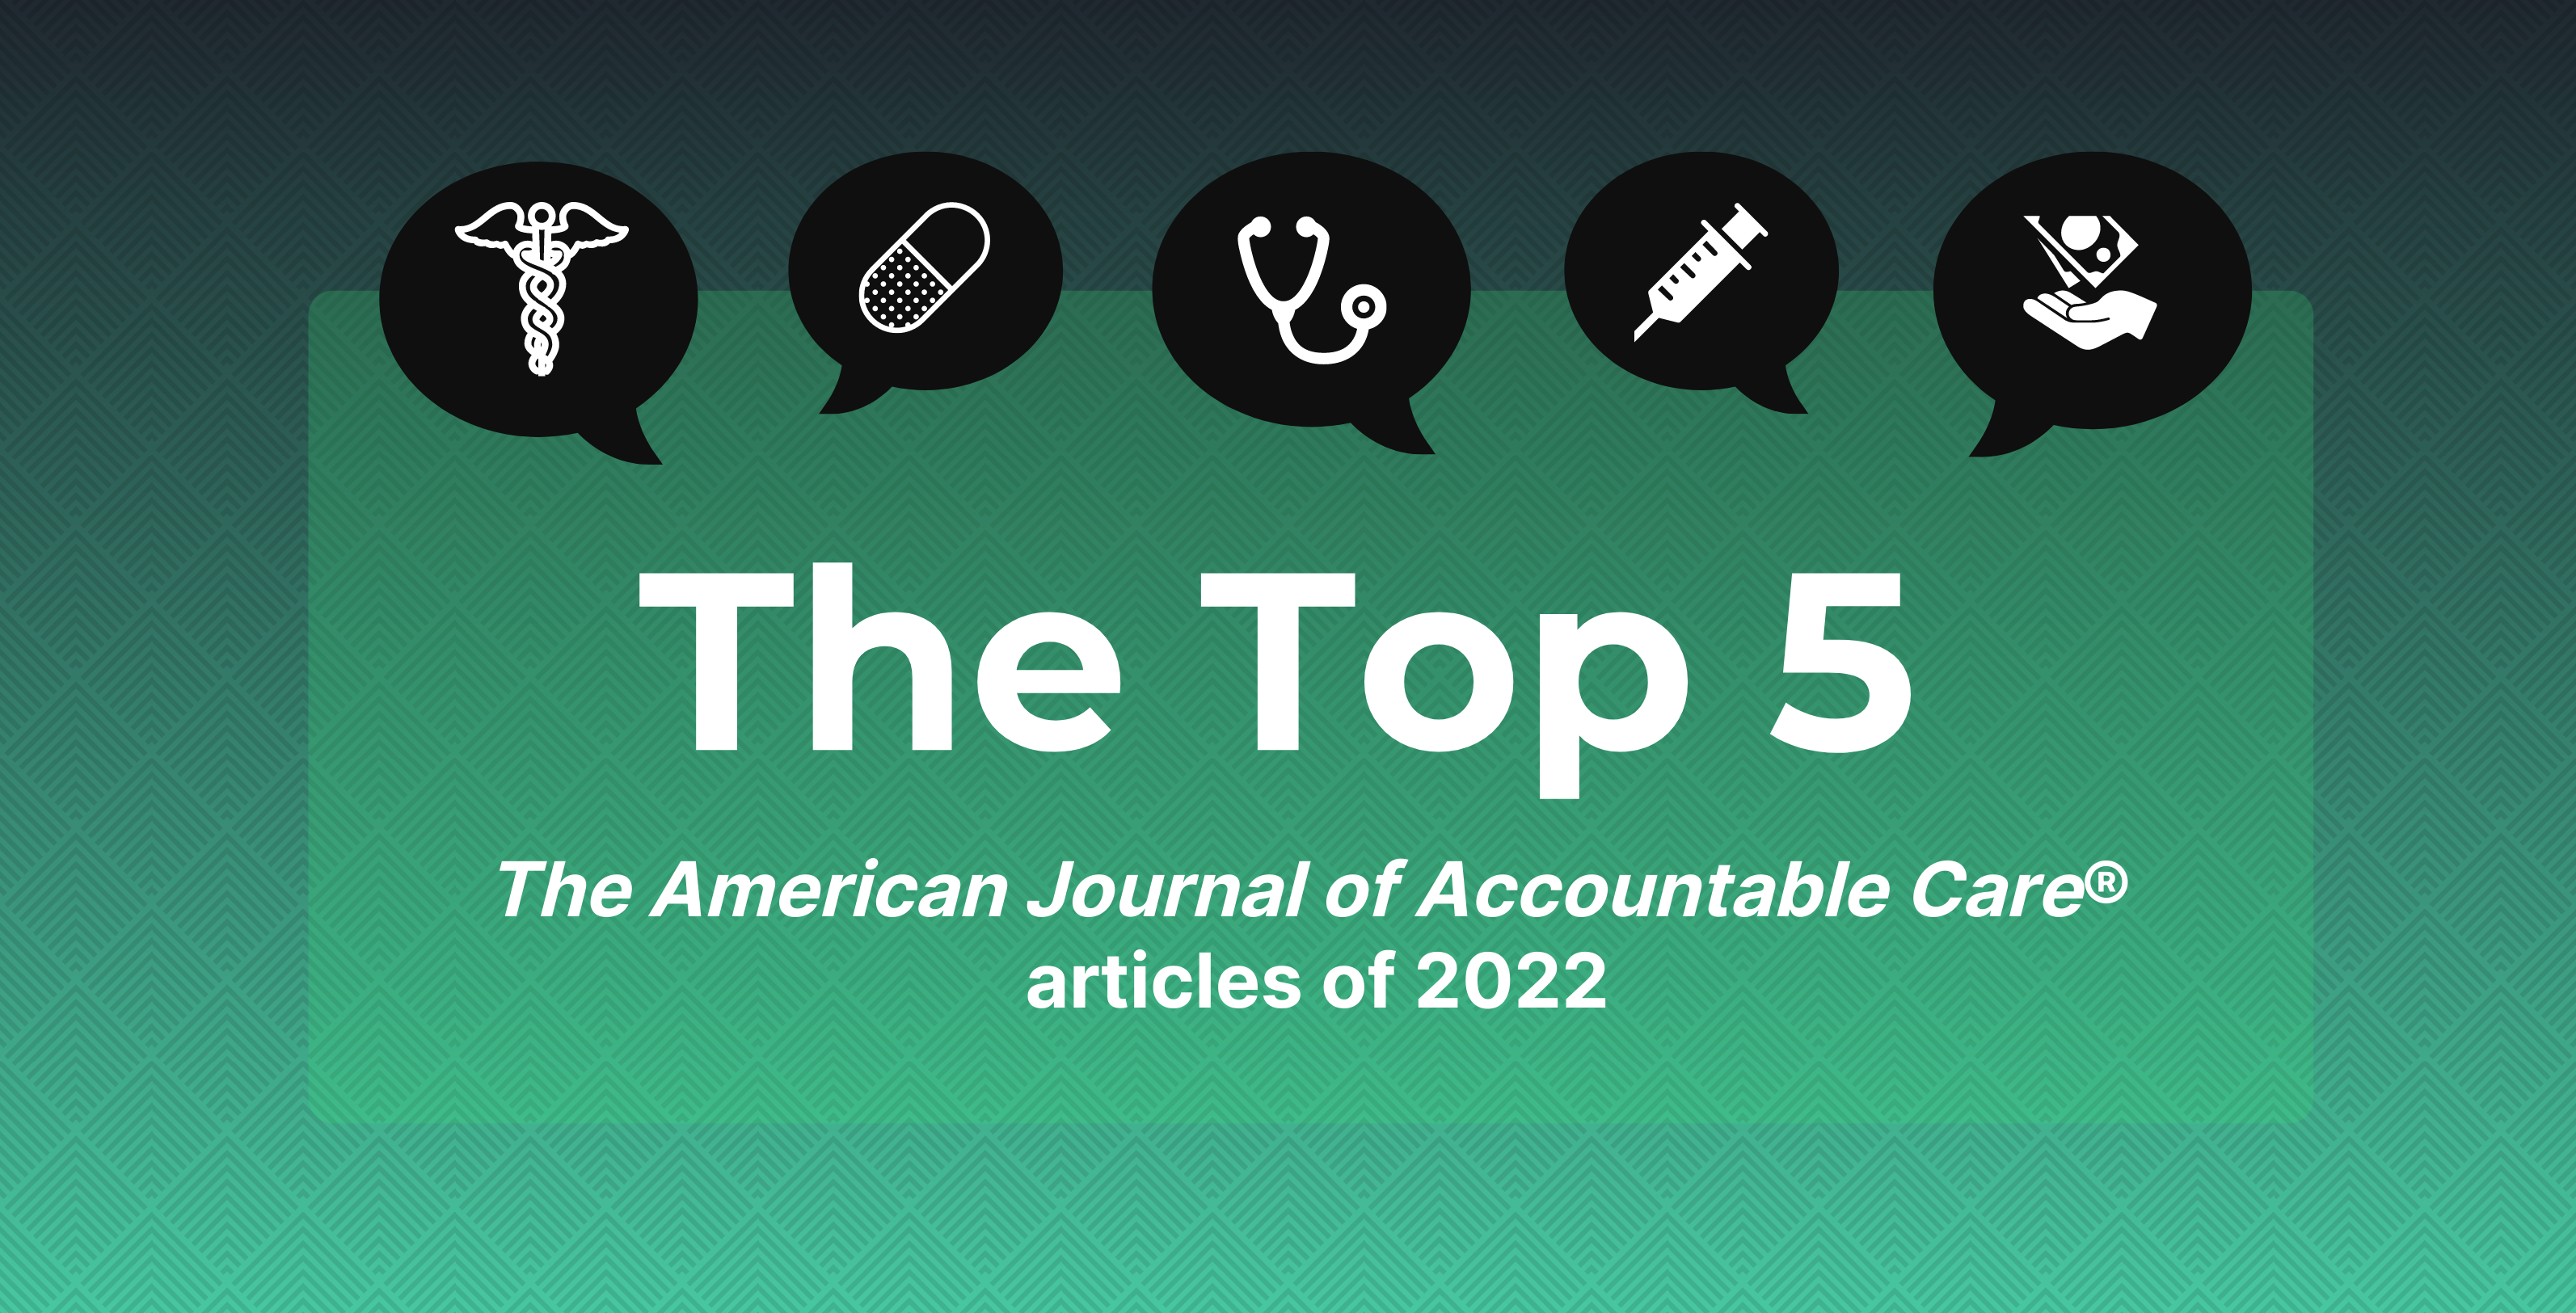 Graphic with the words "The Top 5 The American Journal of Accountable Care articles of 2022"